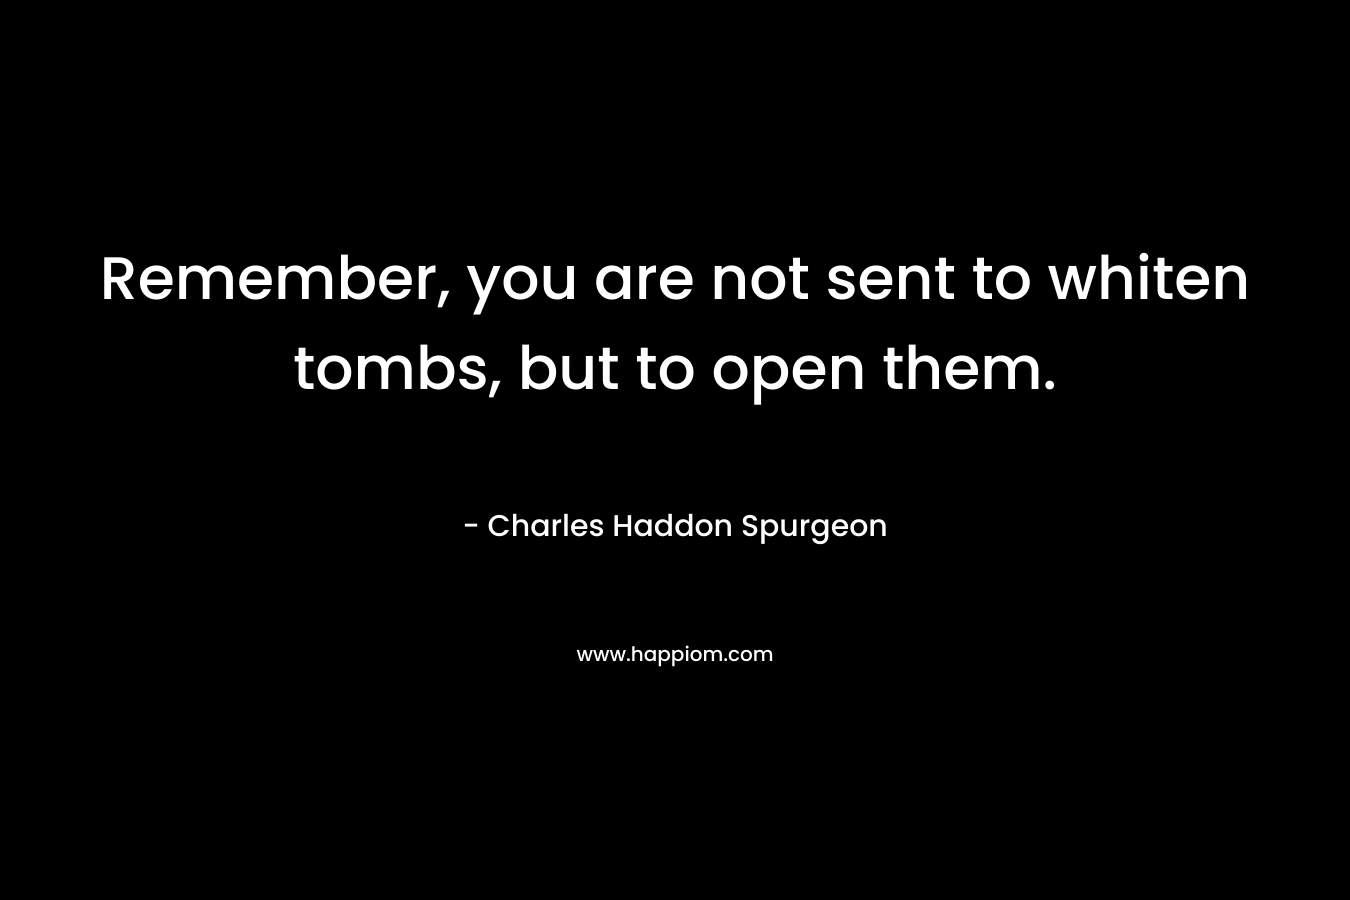 Remember, you are not sent to whiten tombs, but to open them.